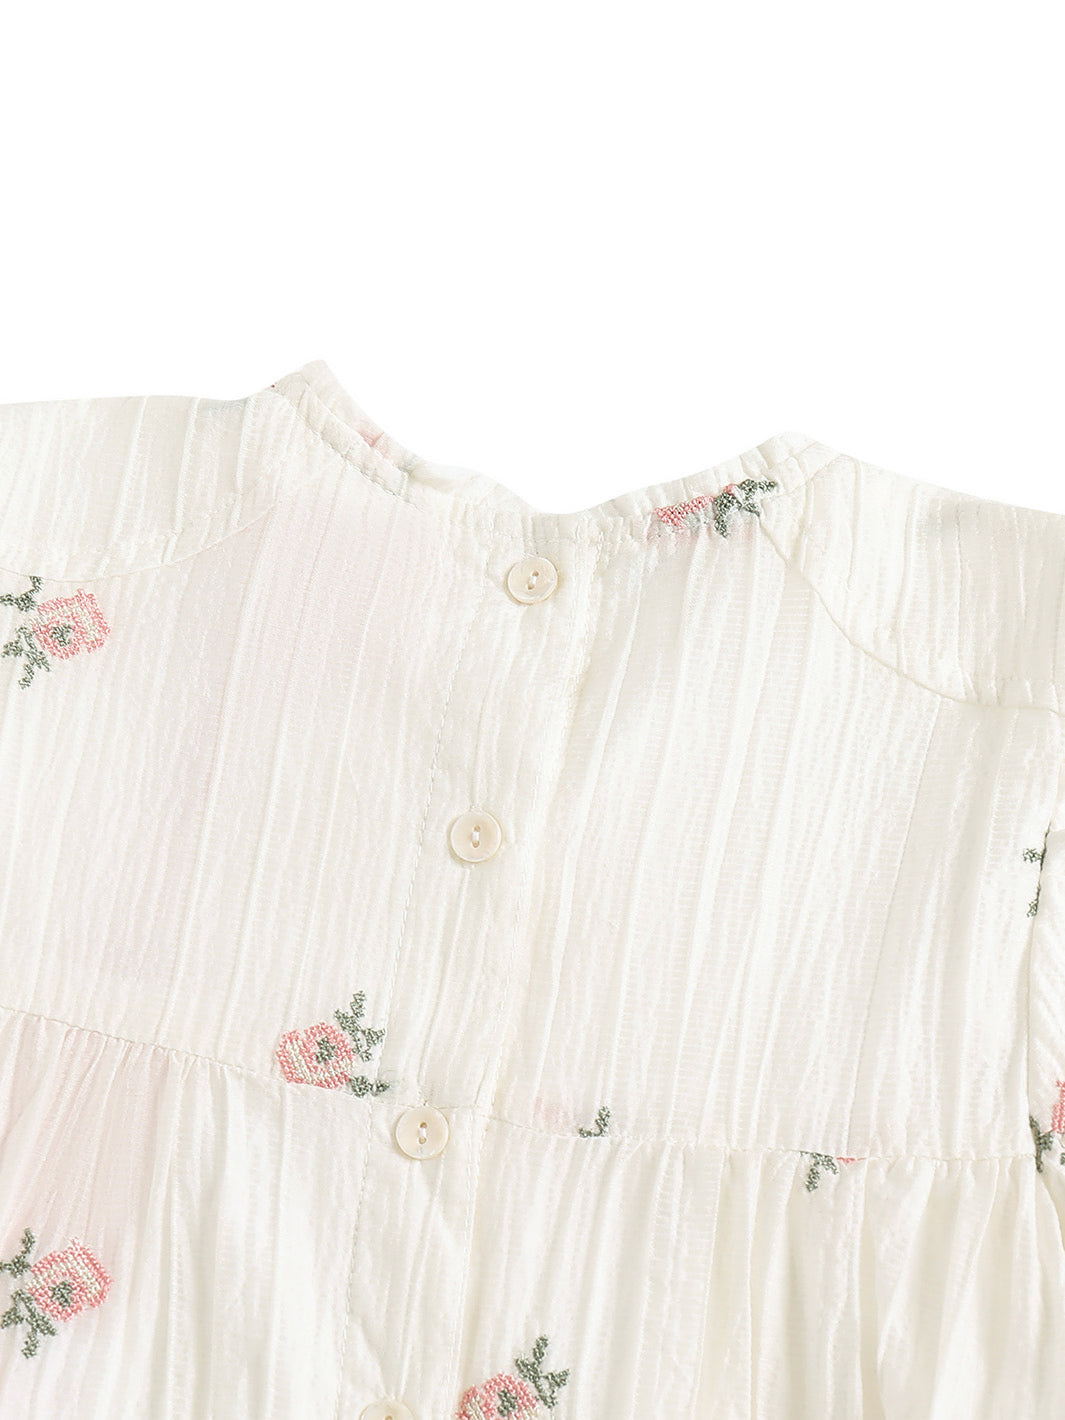 Embroidered Rose Dress